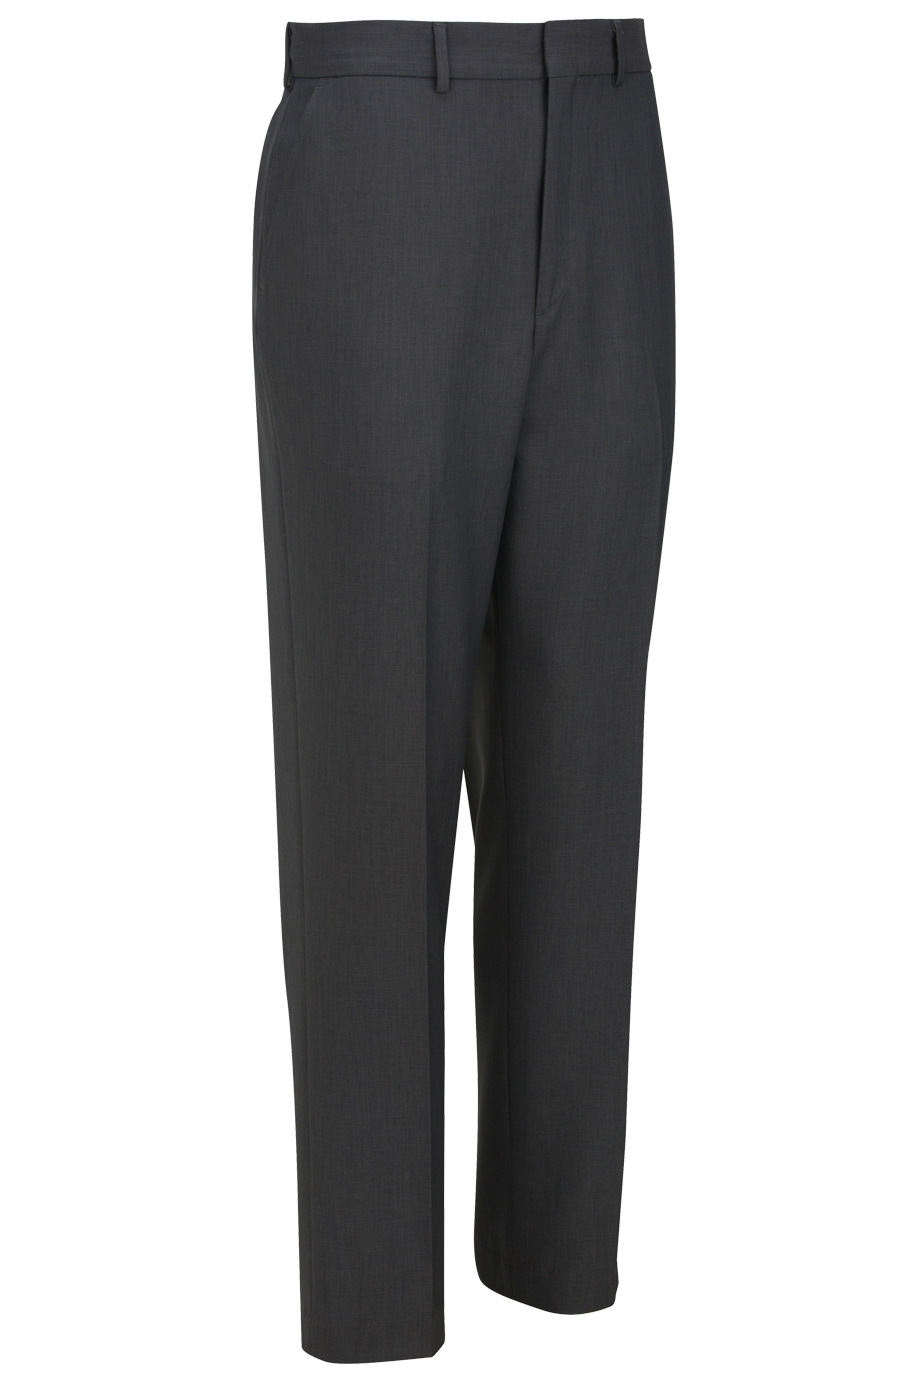 Mens Washable Traditional Fit Flat Front Pant Synergy 2525